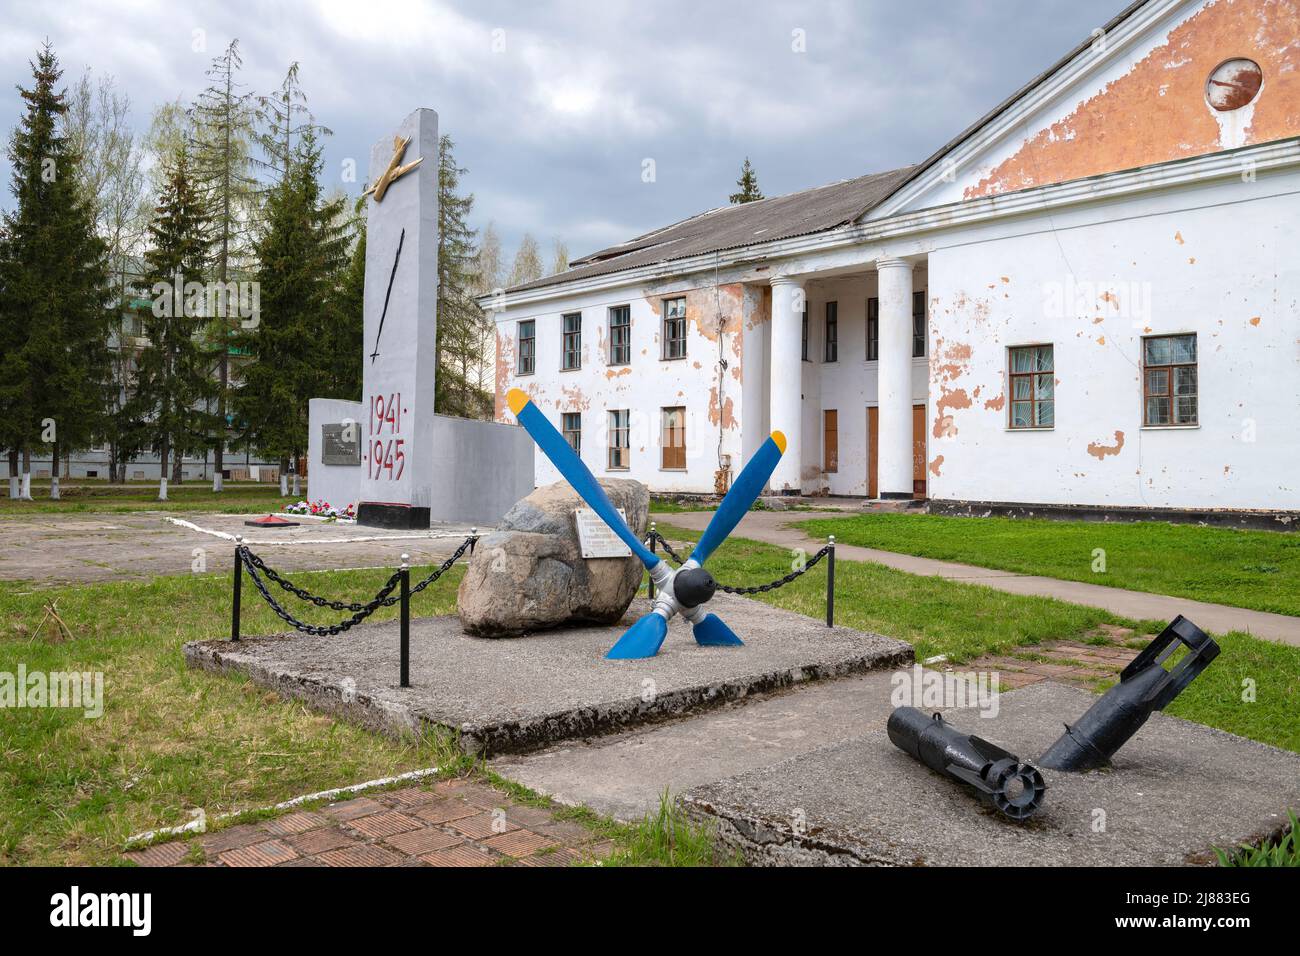 SOLTSY, RUSSIA - MAY 07, 2022: Monument to the military pilots who died during the Great Patriotic War on the territory of the former military garriso Stock Photo